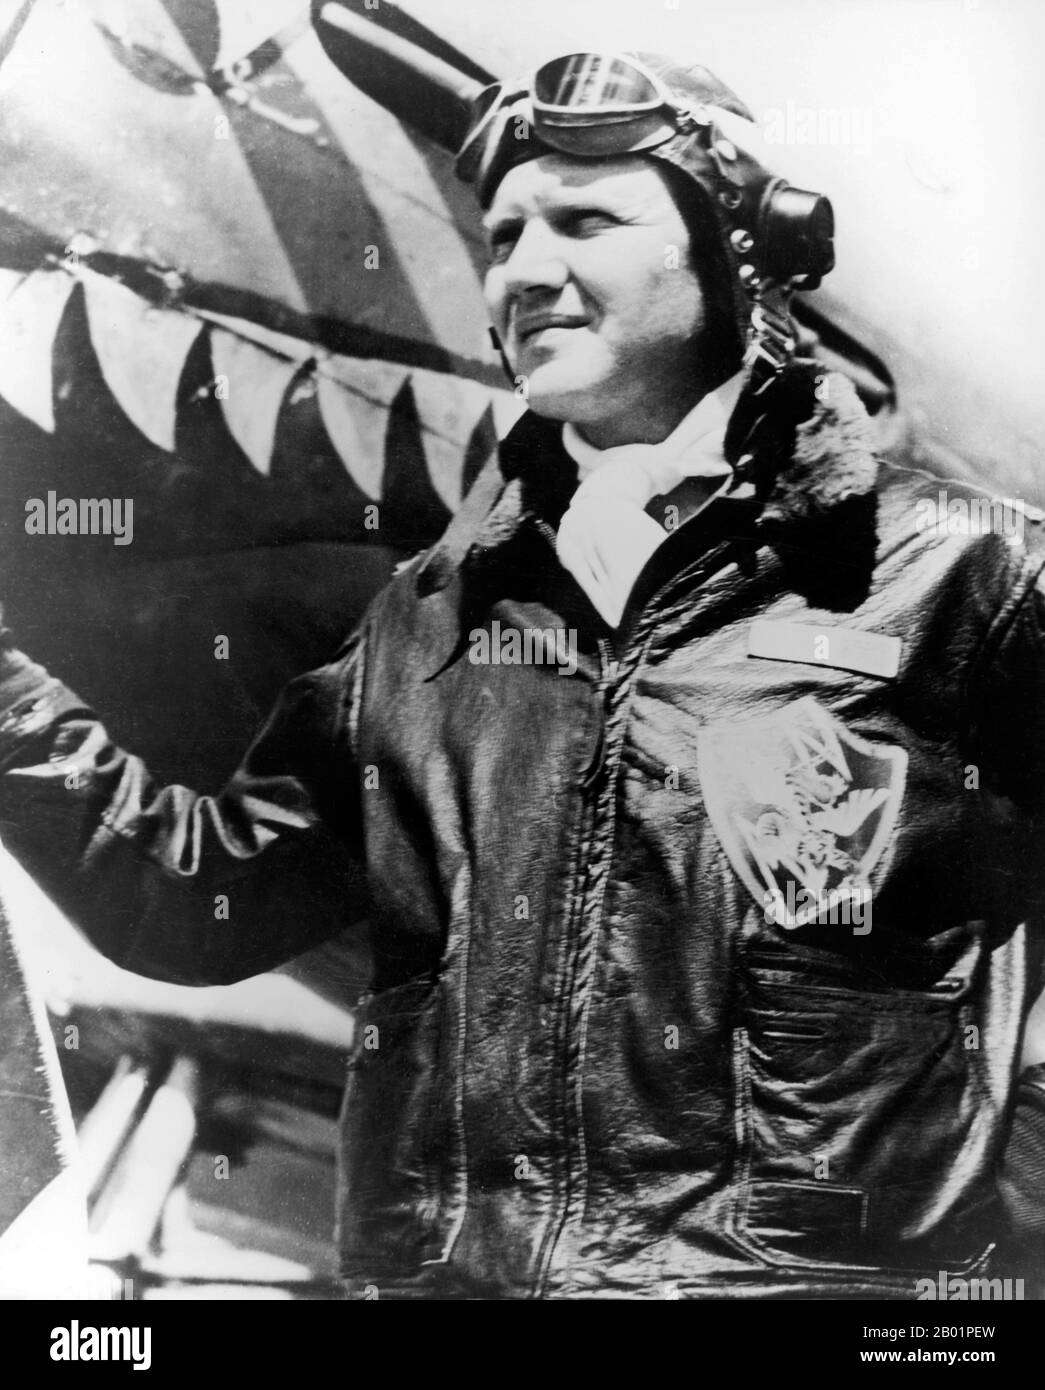 China/USA: David Lee 'Tex' Hill (13 July 1915 - 11 October 2007), fighter pilot and Flying Tigers ace in World War II, poses in front of a Curtiss P-40 Tomahawk Fighter, c. 1940s.  Triple ace Brigadier General David Lee “Tex” Hill served as leader of the American Volunteer Group’s (Flying Tigers) 2nd Squadron and commanded the Army Air Corps’ 75th Fighter Squadron and the 23rd Fighter Group. He was also the Texas Air National Guard’s first commander. Stock Photo